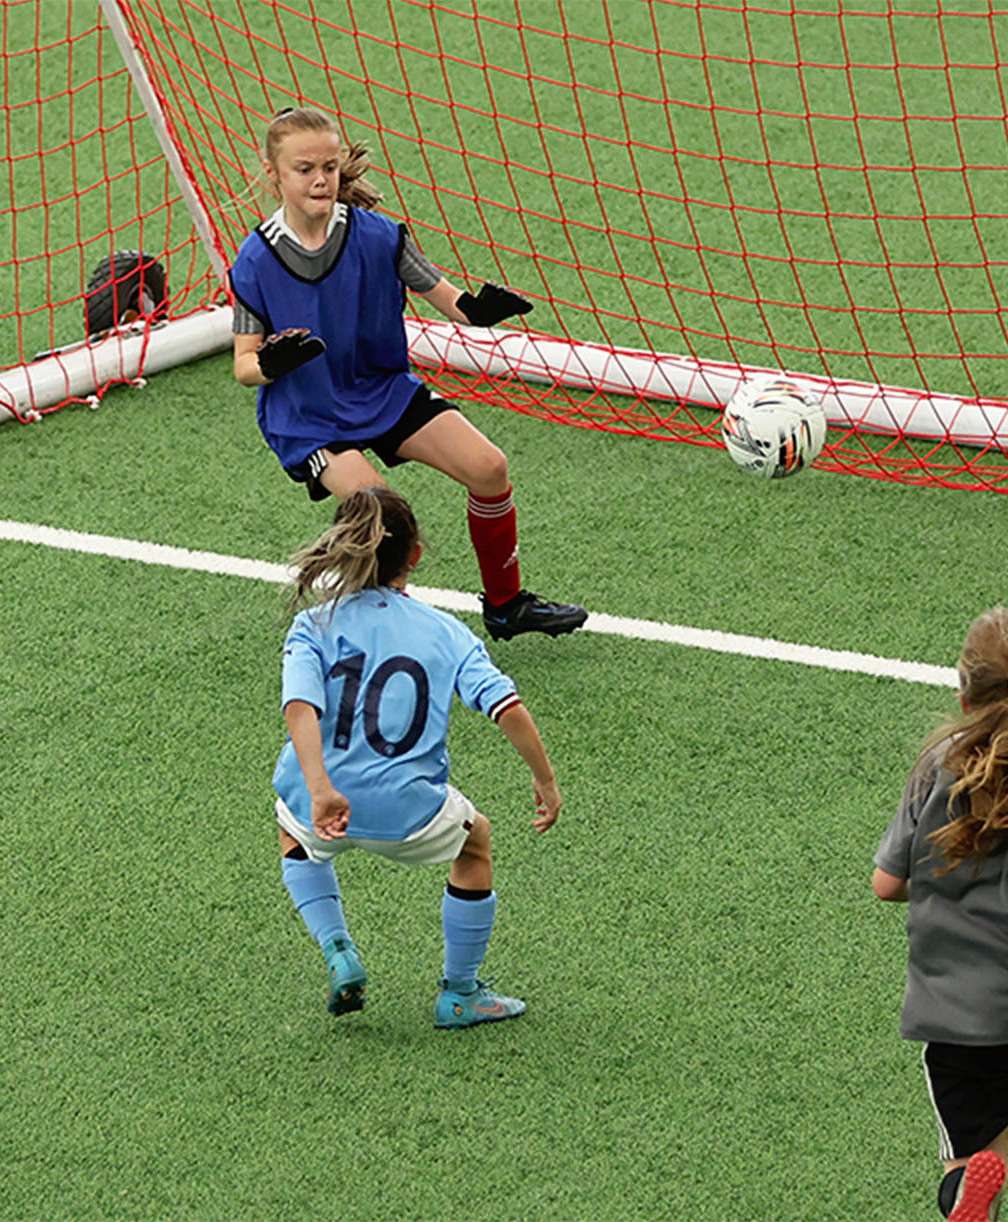 A young player uses the inside of her foot to send an effort towards goal from close range during a match on an indoor 3G pitch.